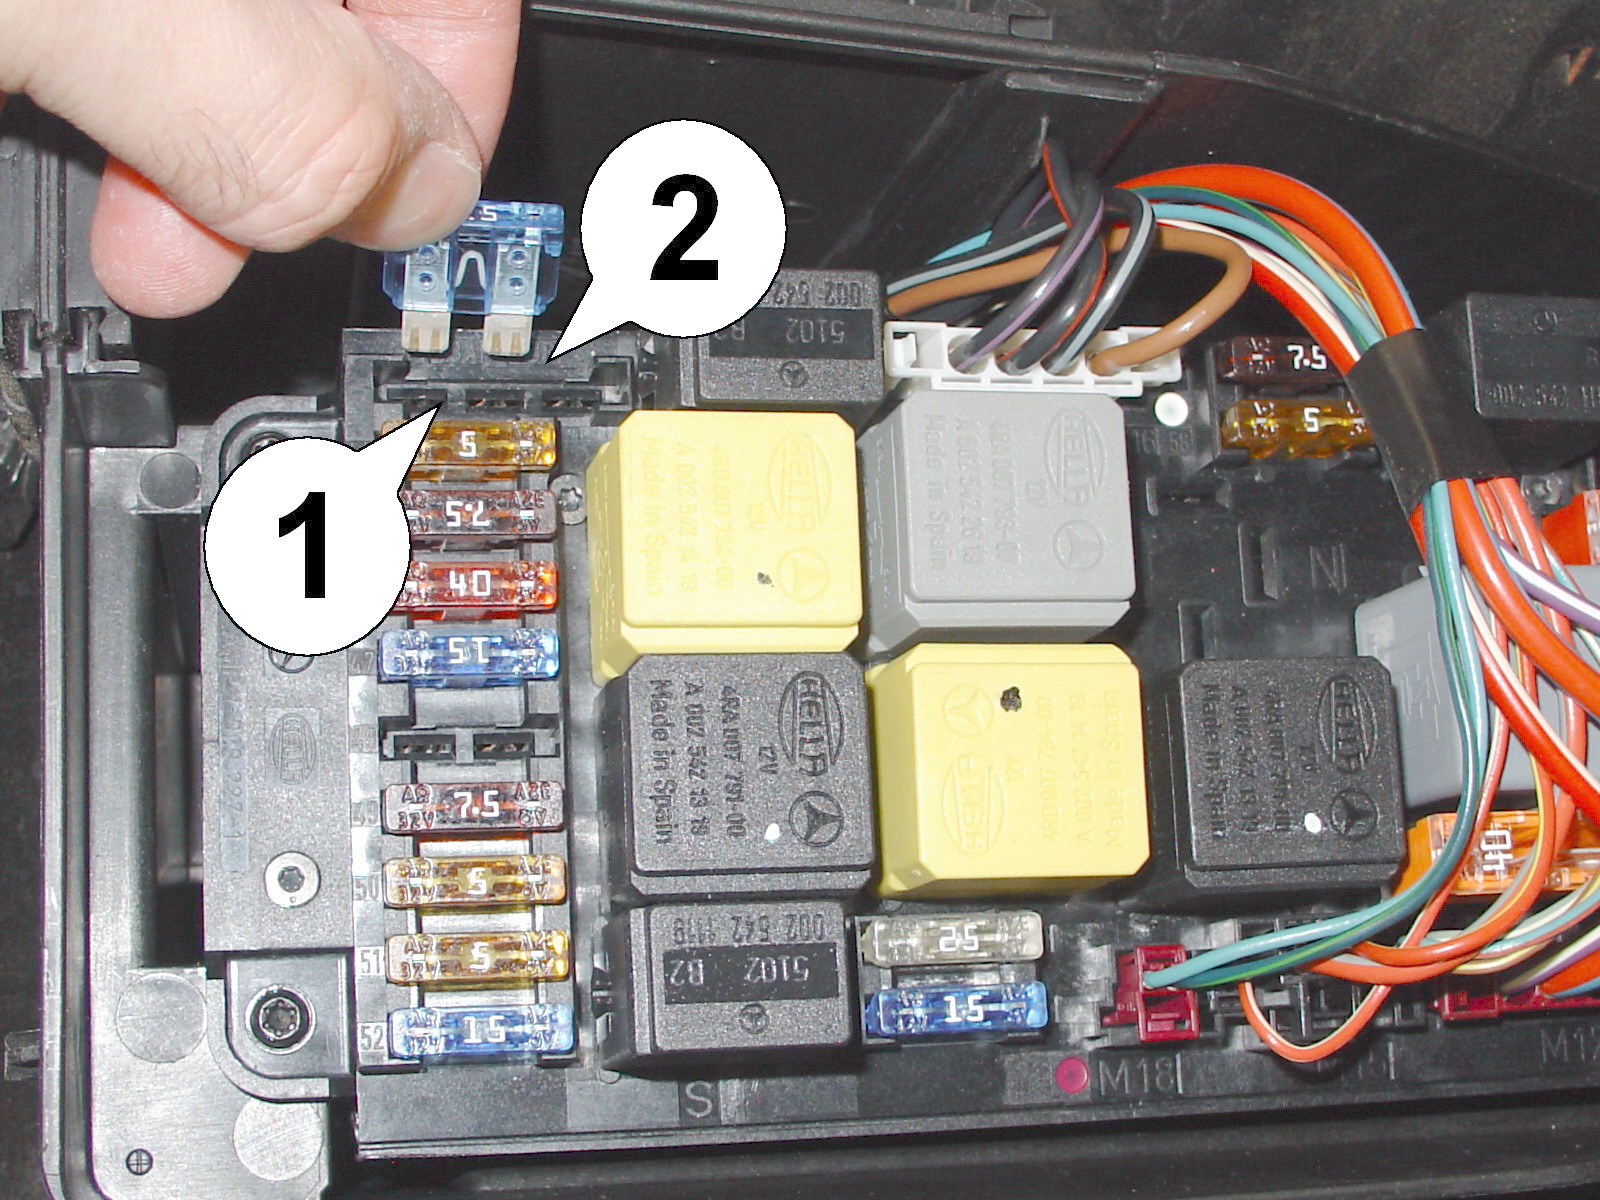 STLBMZ1 Mercedes SLK and CLK how to enable driving HORN chirps mercedes benz wiper motor wiring diagram 